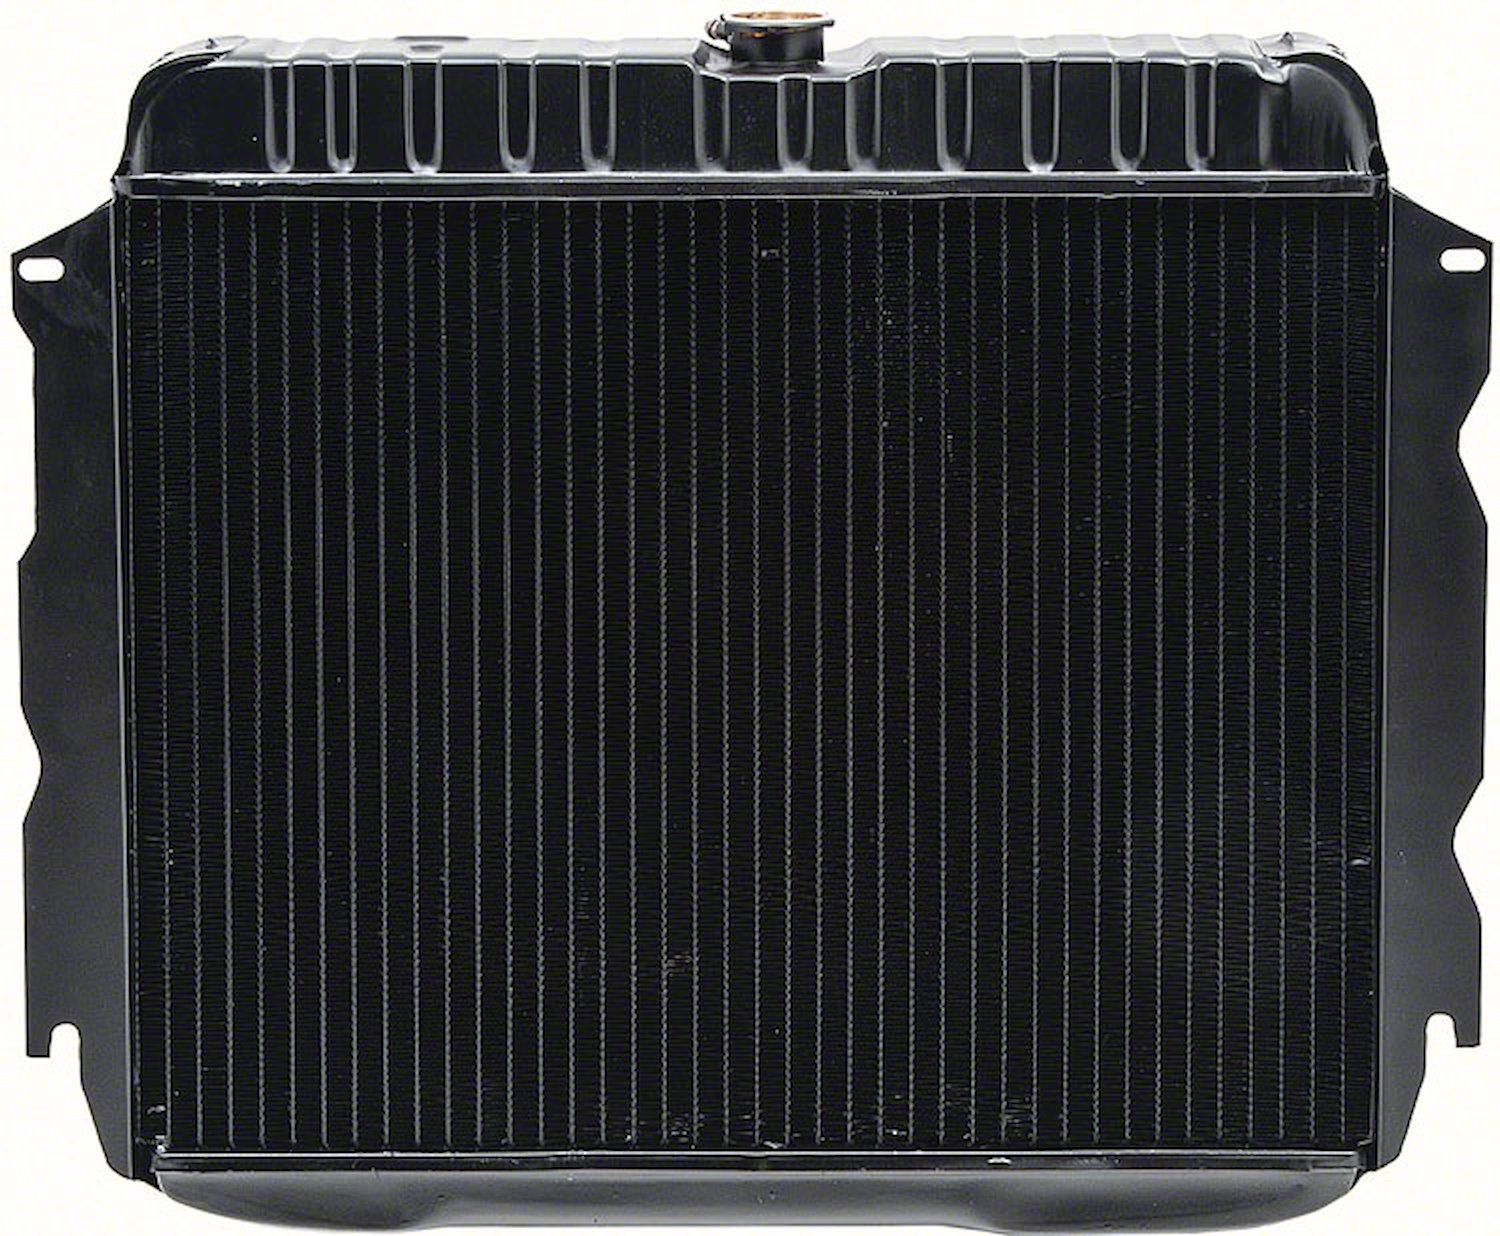 MD2299S Replacement Radiator 1973 Mopar B/E-Body Small Block V8 With Standard Trans 4 Row 22" Wide